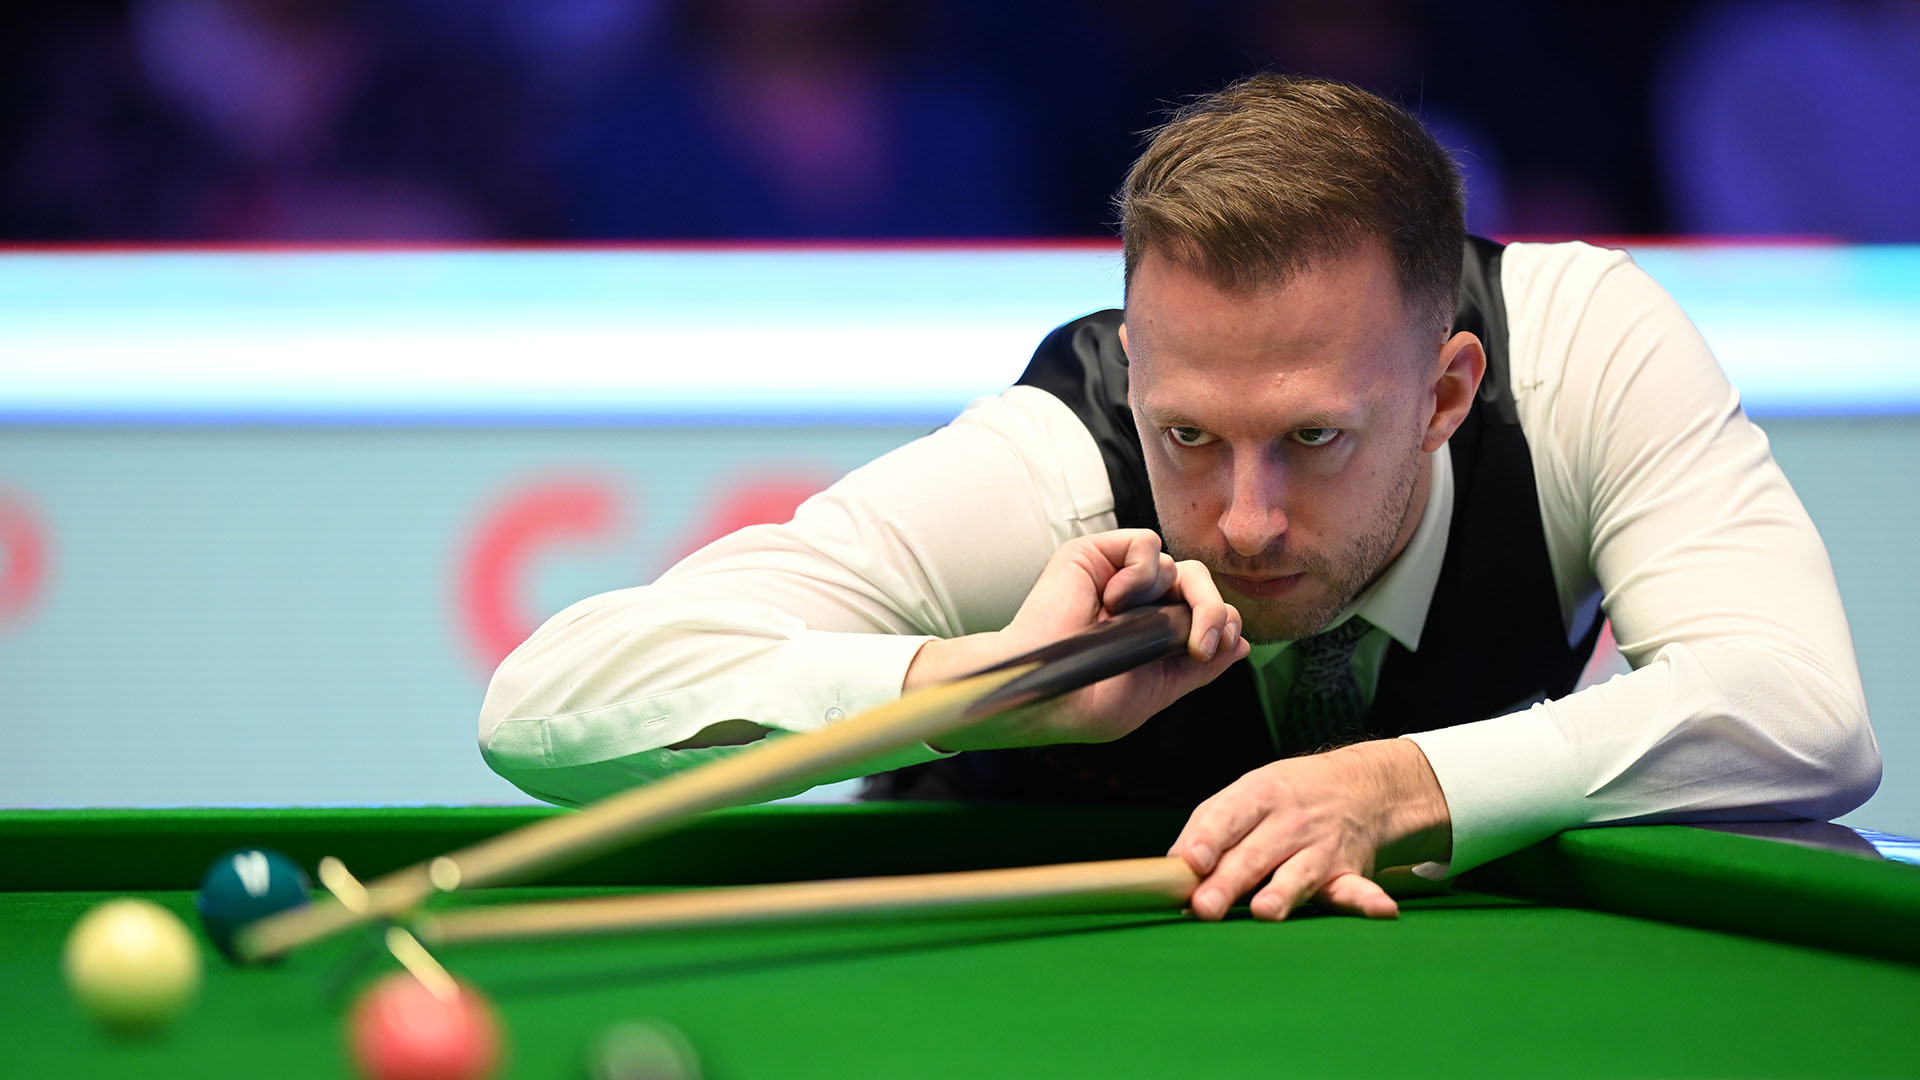 Wuhan Open snooker 2023 - Latest scores, results, schedule, order of play  as Judd Trump bids for glory - Eurosport